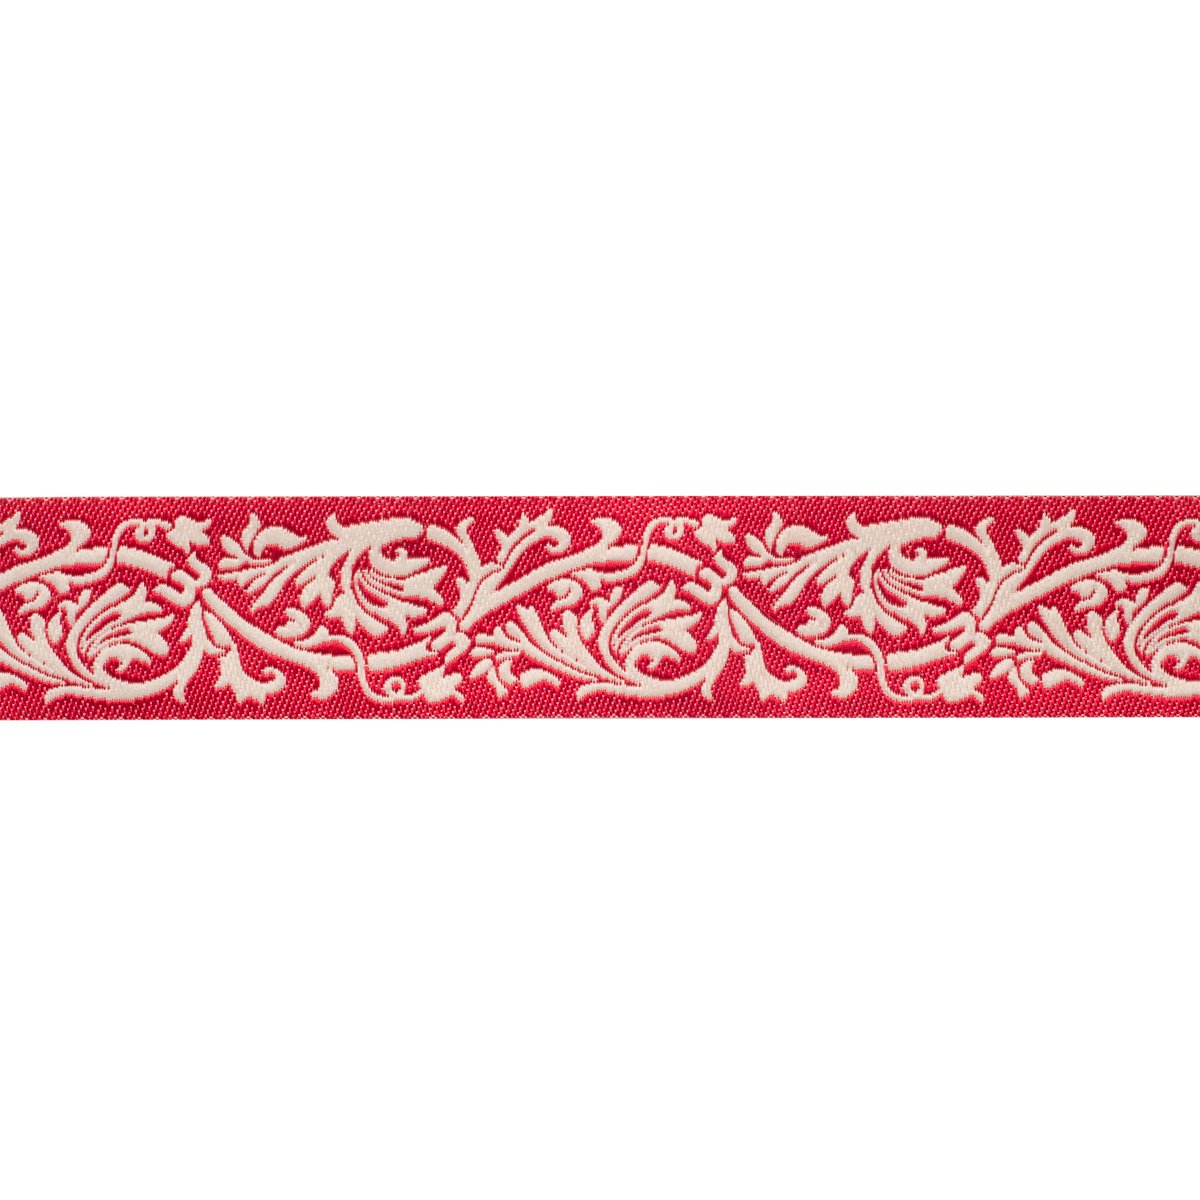 Red Brocade Pearl on Red Ribbon 7/8" from La Vie en Rouge Collection by French General for Renaissance Ribbon: Sewing, Quilting, Crafting